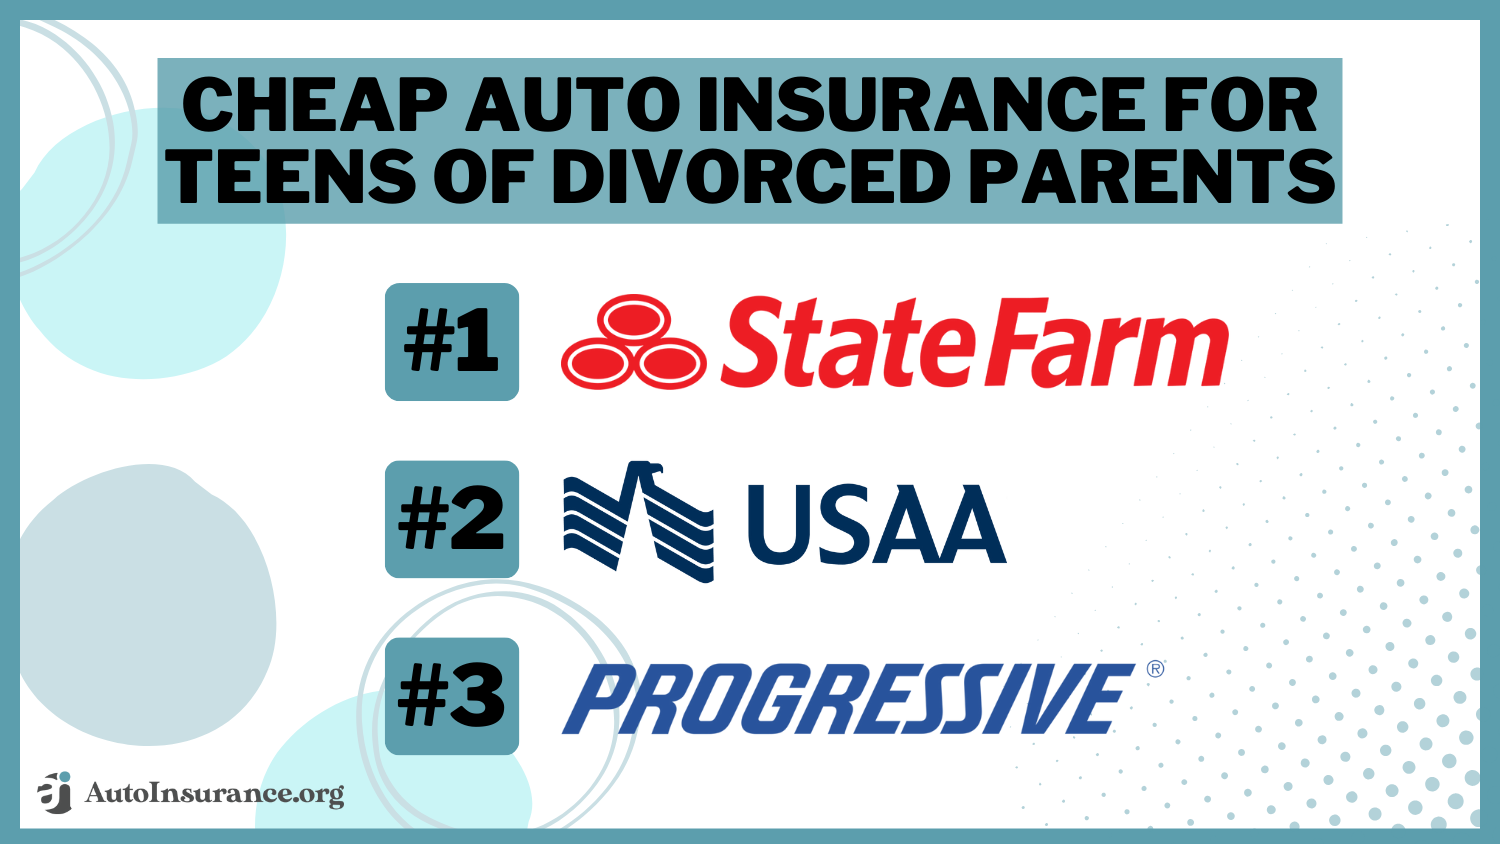 Cheap Auto Insurance for Teens of Divorced Parents: State Farm, USAA